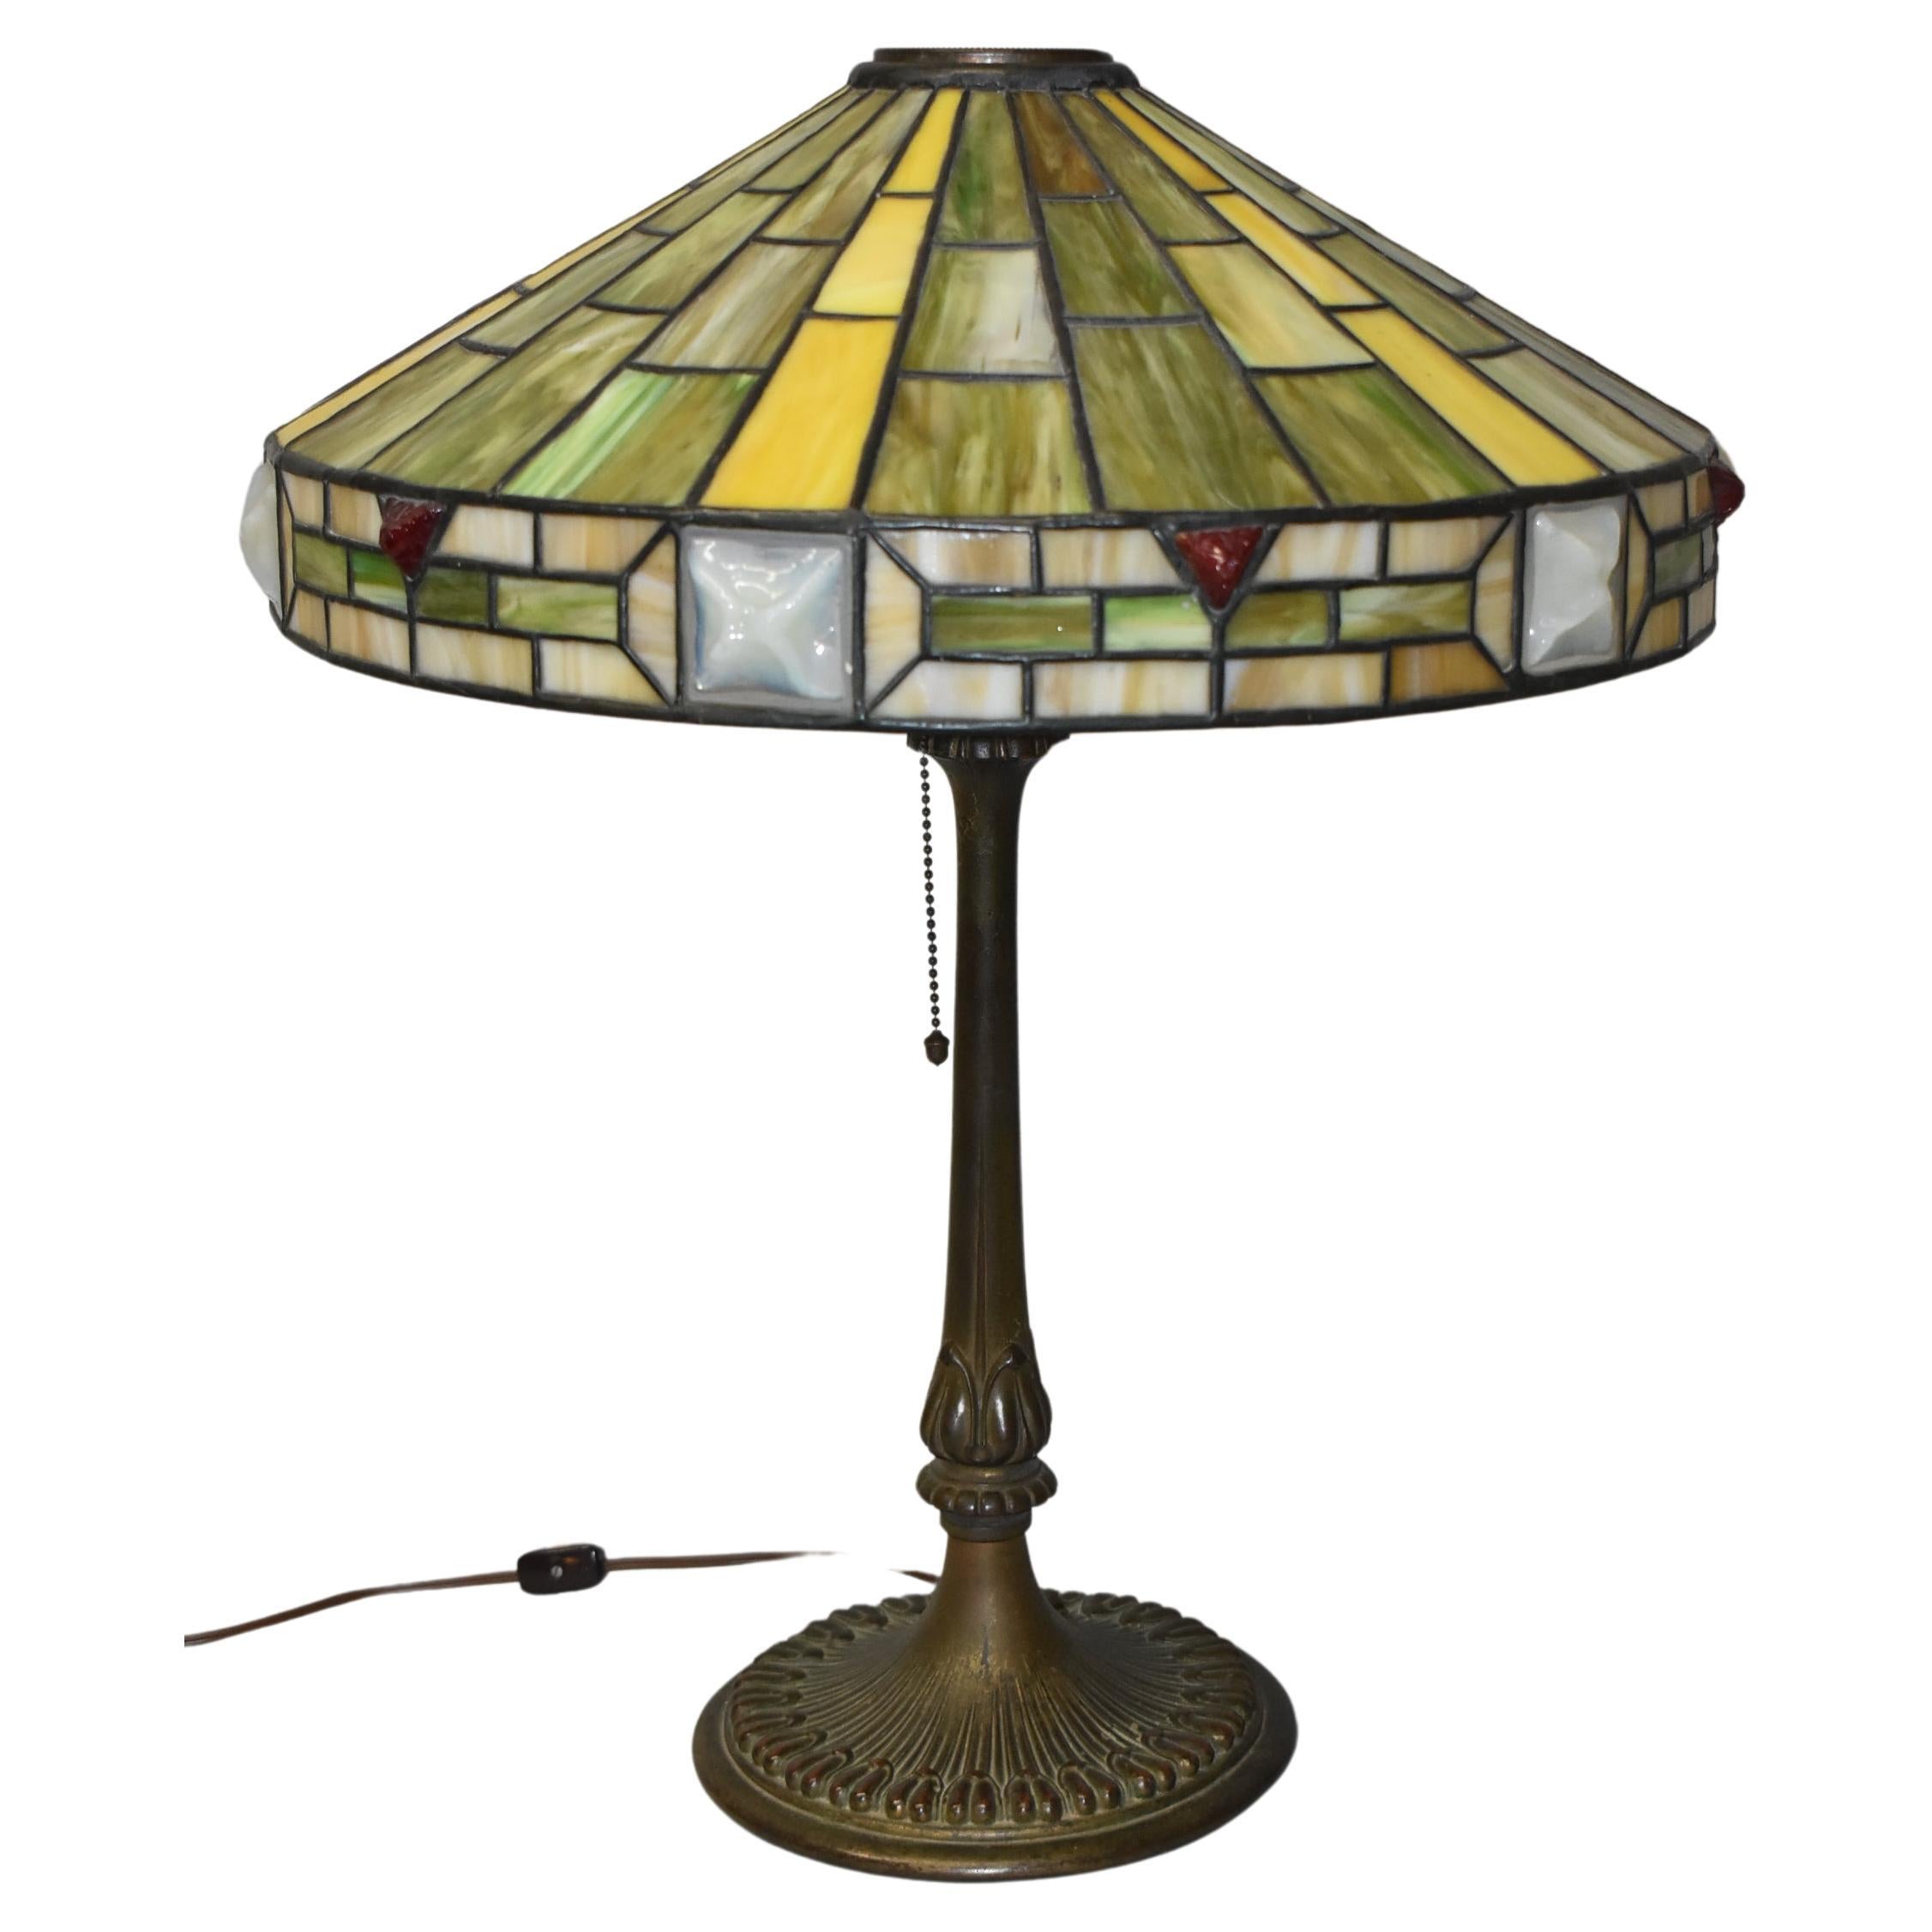 Wilkinson Arts & Crafts Leaded Glass Table Lamp